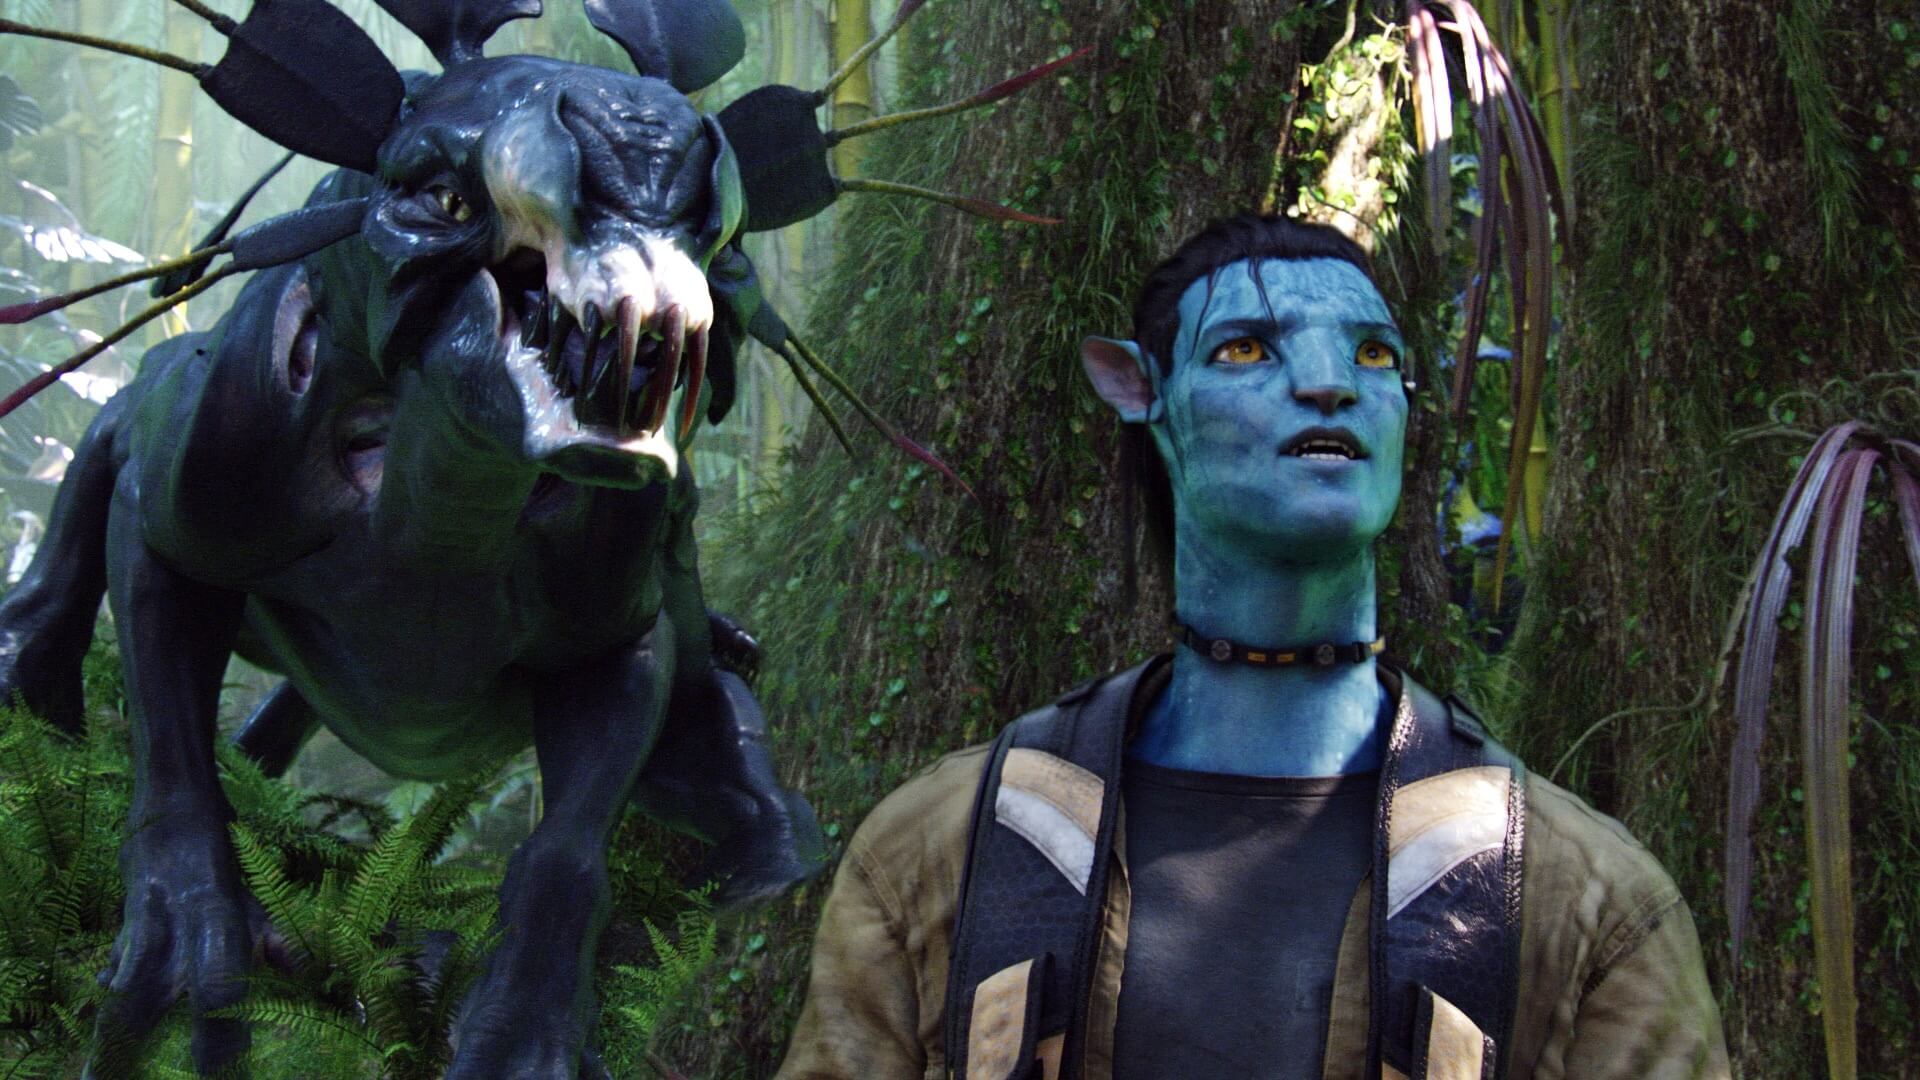 Making of Avatar & Avatar 2: Behind-the-Scenes of James Cameron's Epic